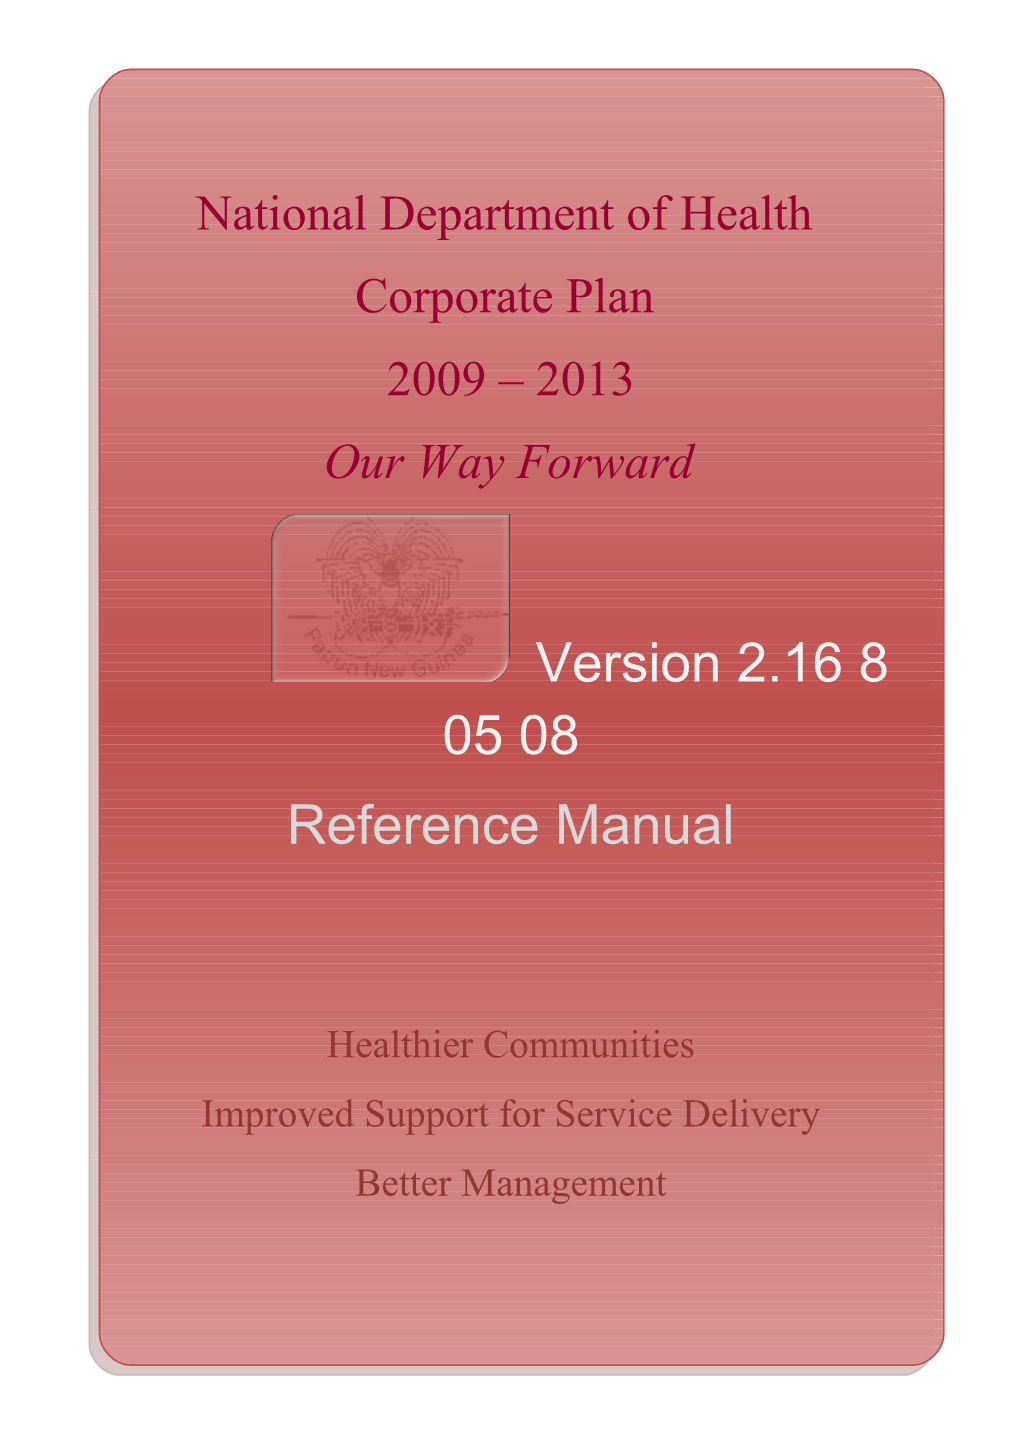 National Department of Health Corporate Plan